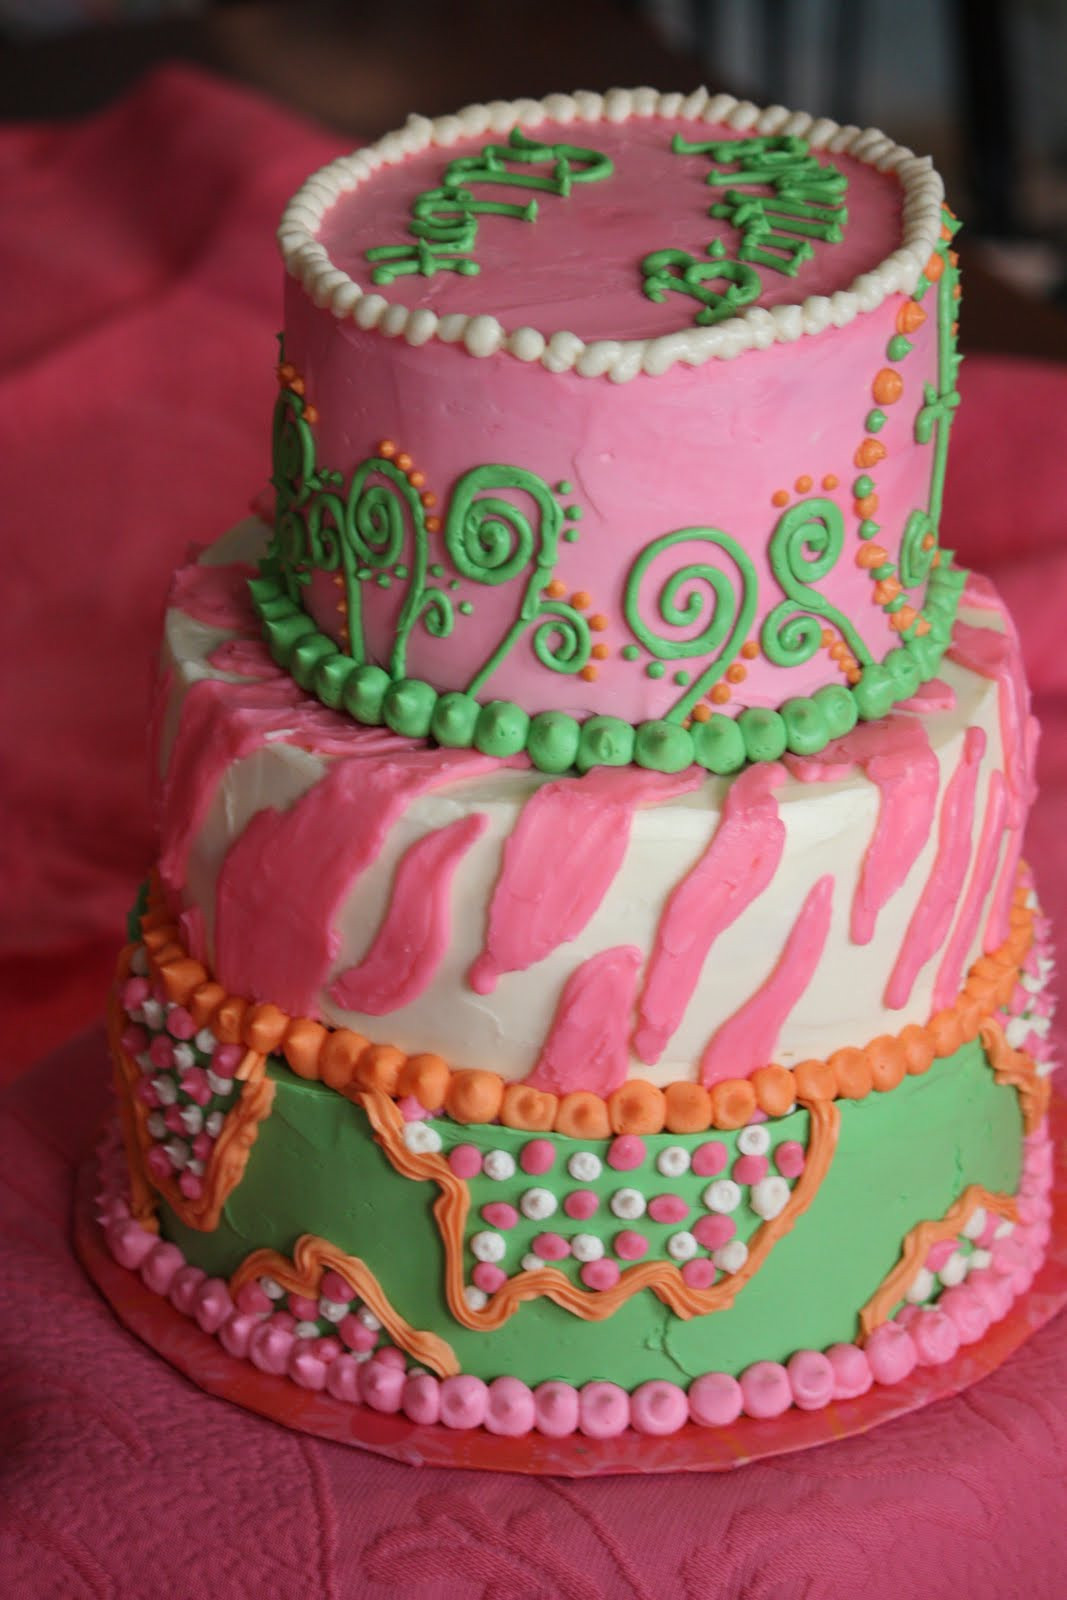 Pink And Green Birthday Cake
 The Blackberry Vine Pink Orange and Green Birthday Cake